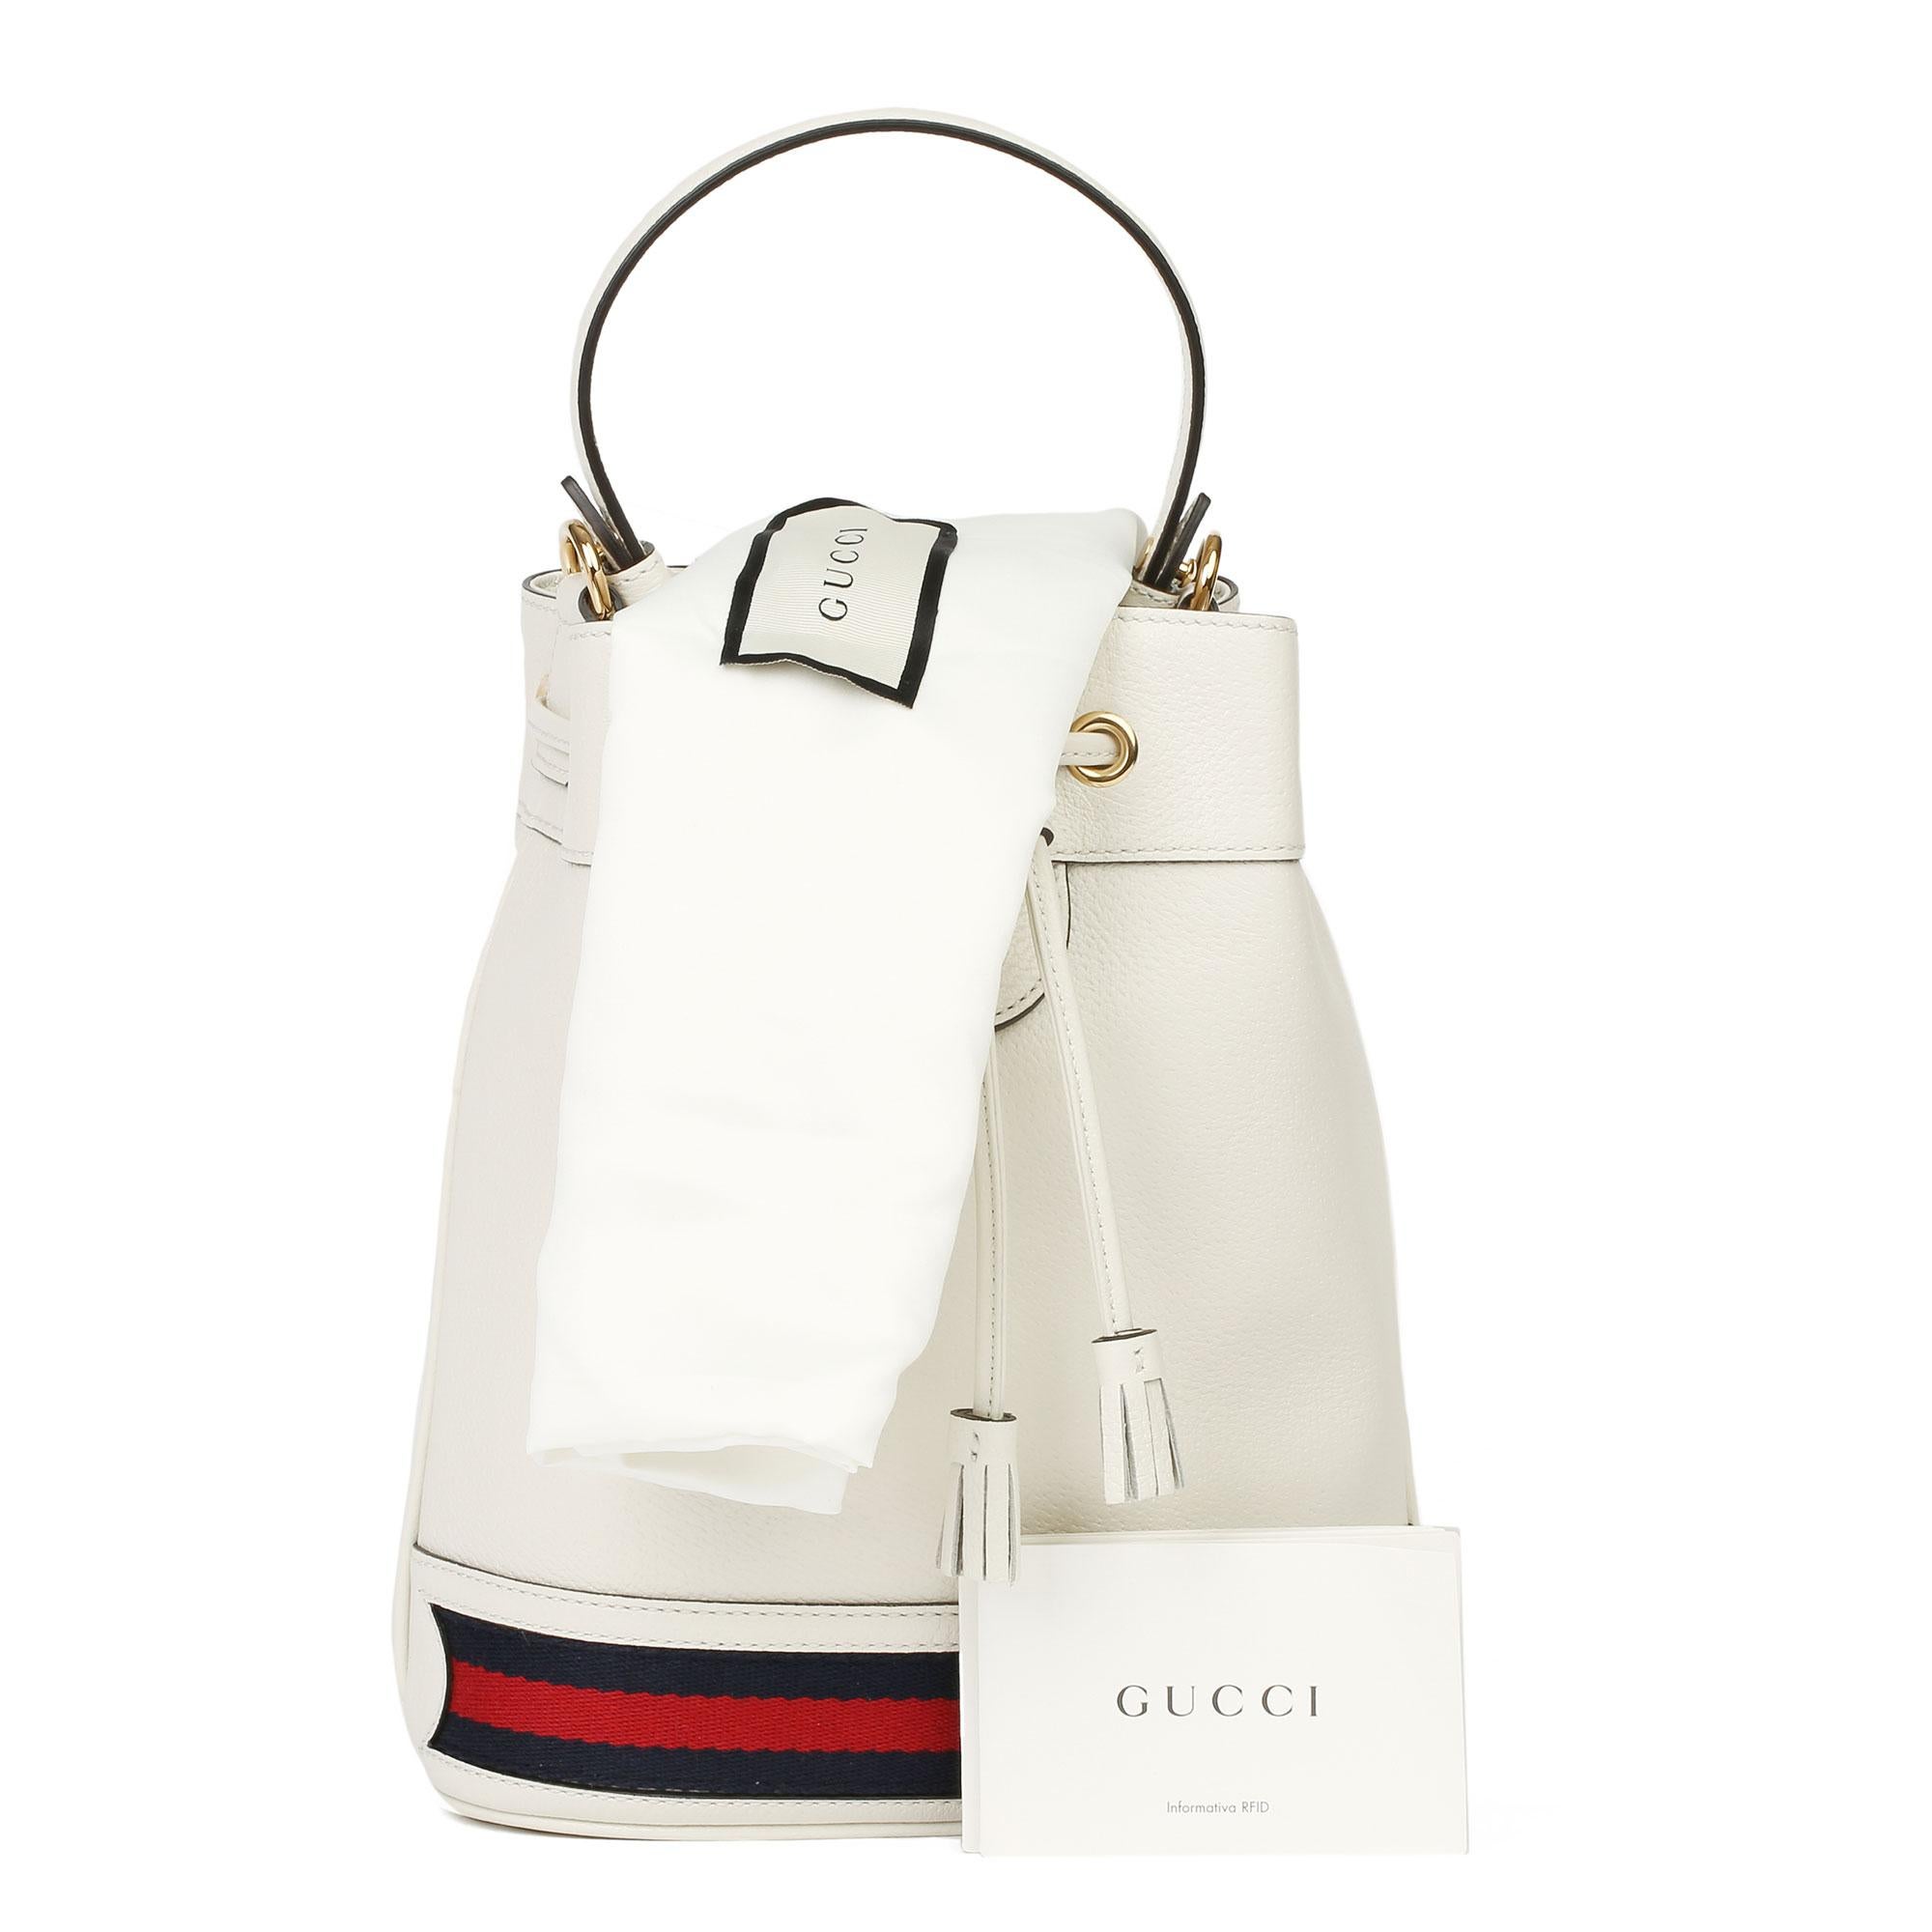 2021 Gucci White Pigskin Leather Web Orphidia Bucket Bag 7